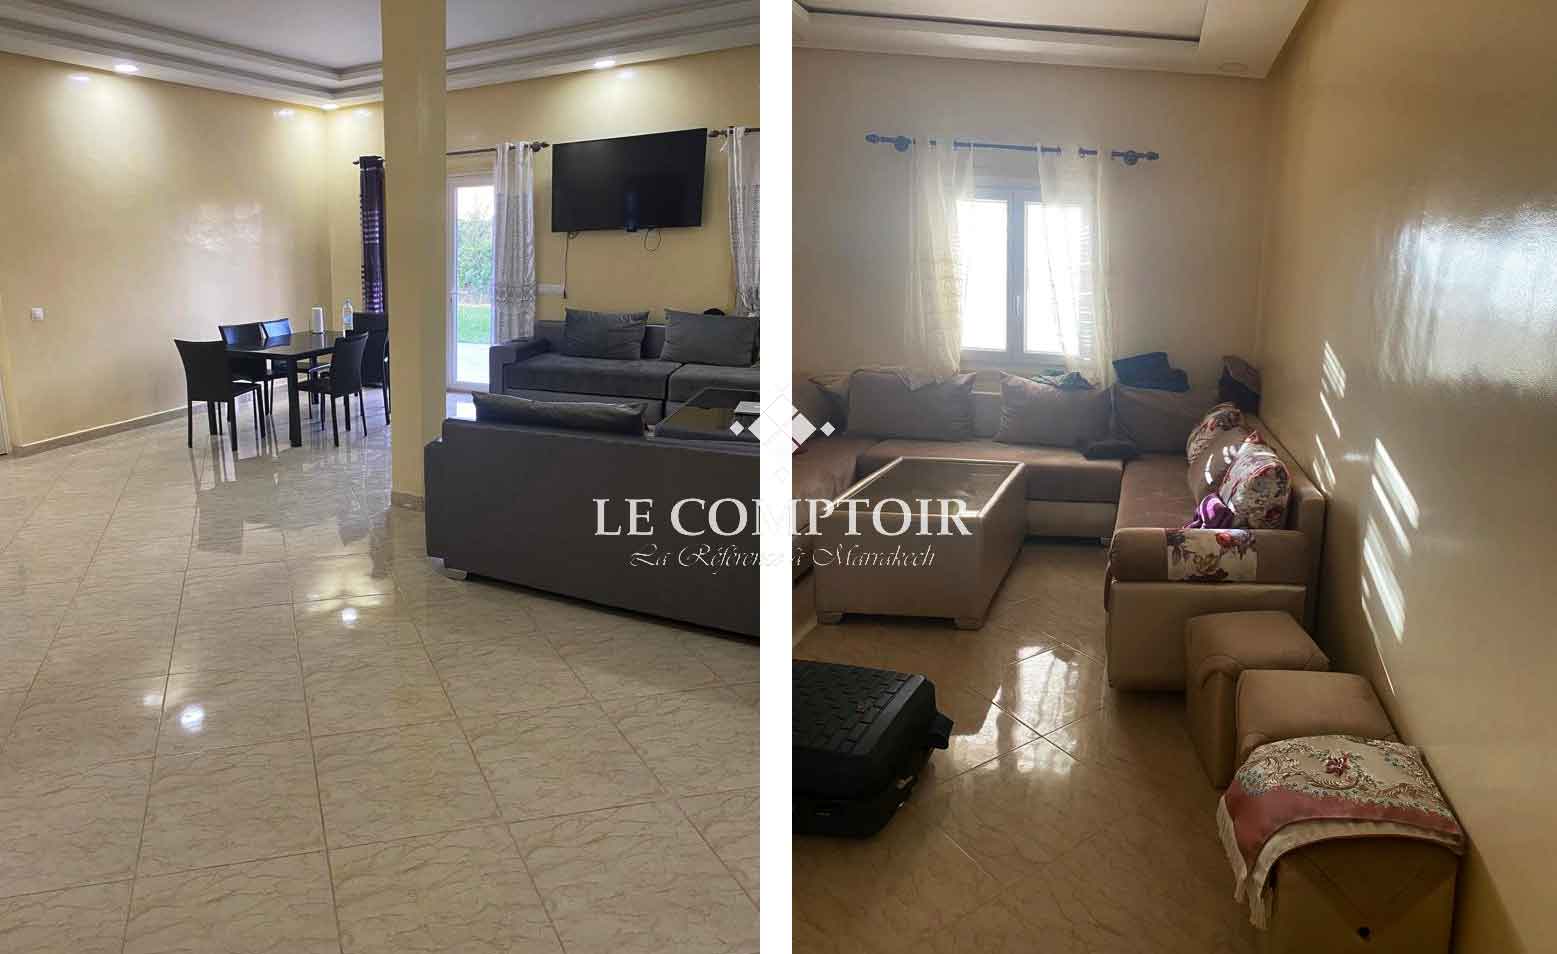 Le Comptoir Immobilier Agence Immobiliere Marrakech Maison Chouiter Individuelle Chouiter Marrakech Privatif Piscine Jardin Vente Villa Agence Immobilier Immobiliere Real State 7